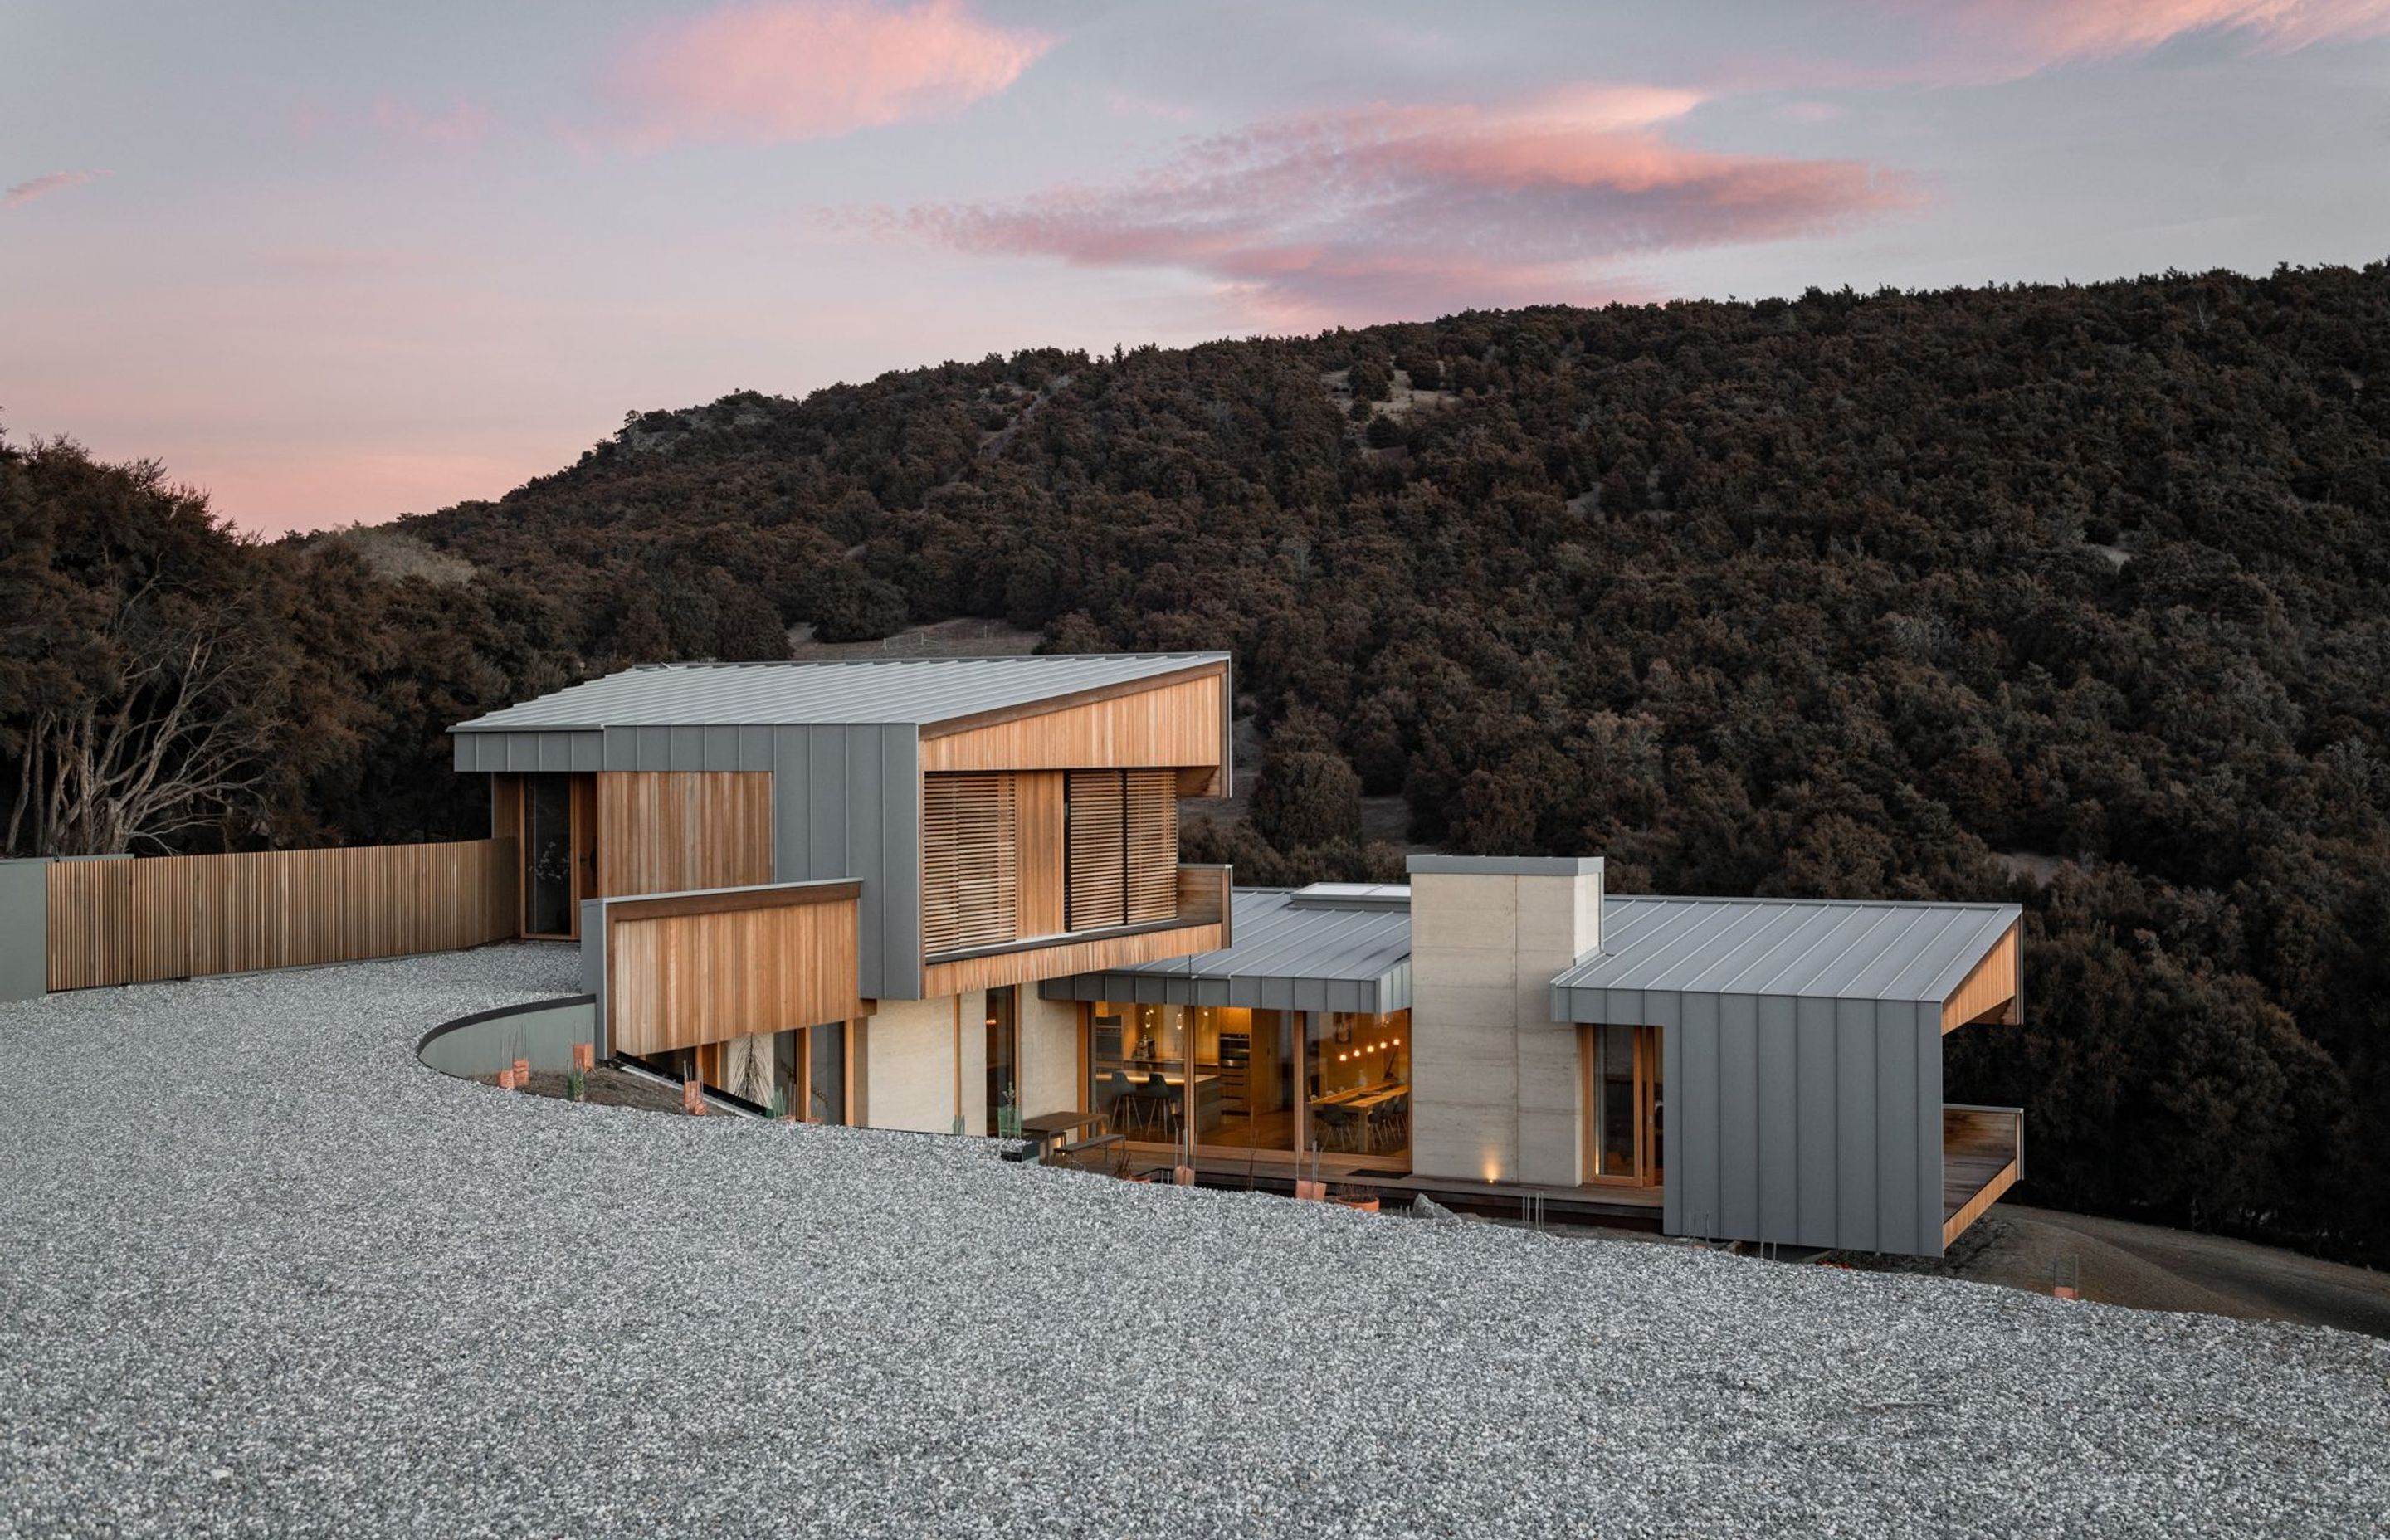 Nestled into a two-acre lot in the ‘Hidden Hills’ development of Wanaka, this home was designed to afford its owners a high level of privacy and comfort.